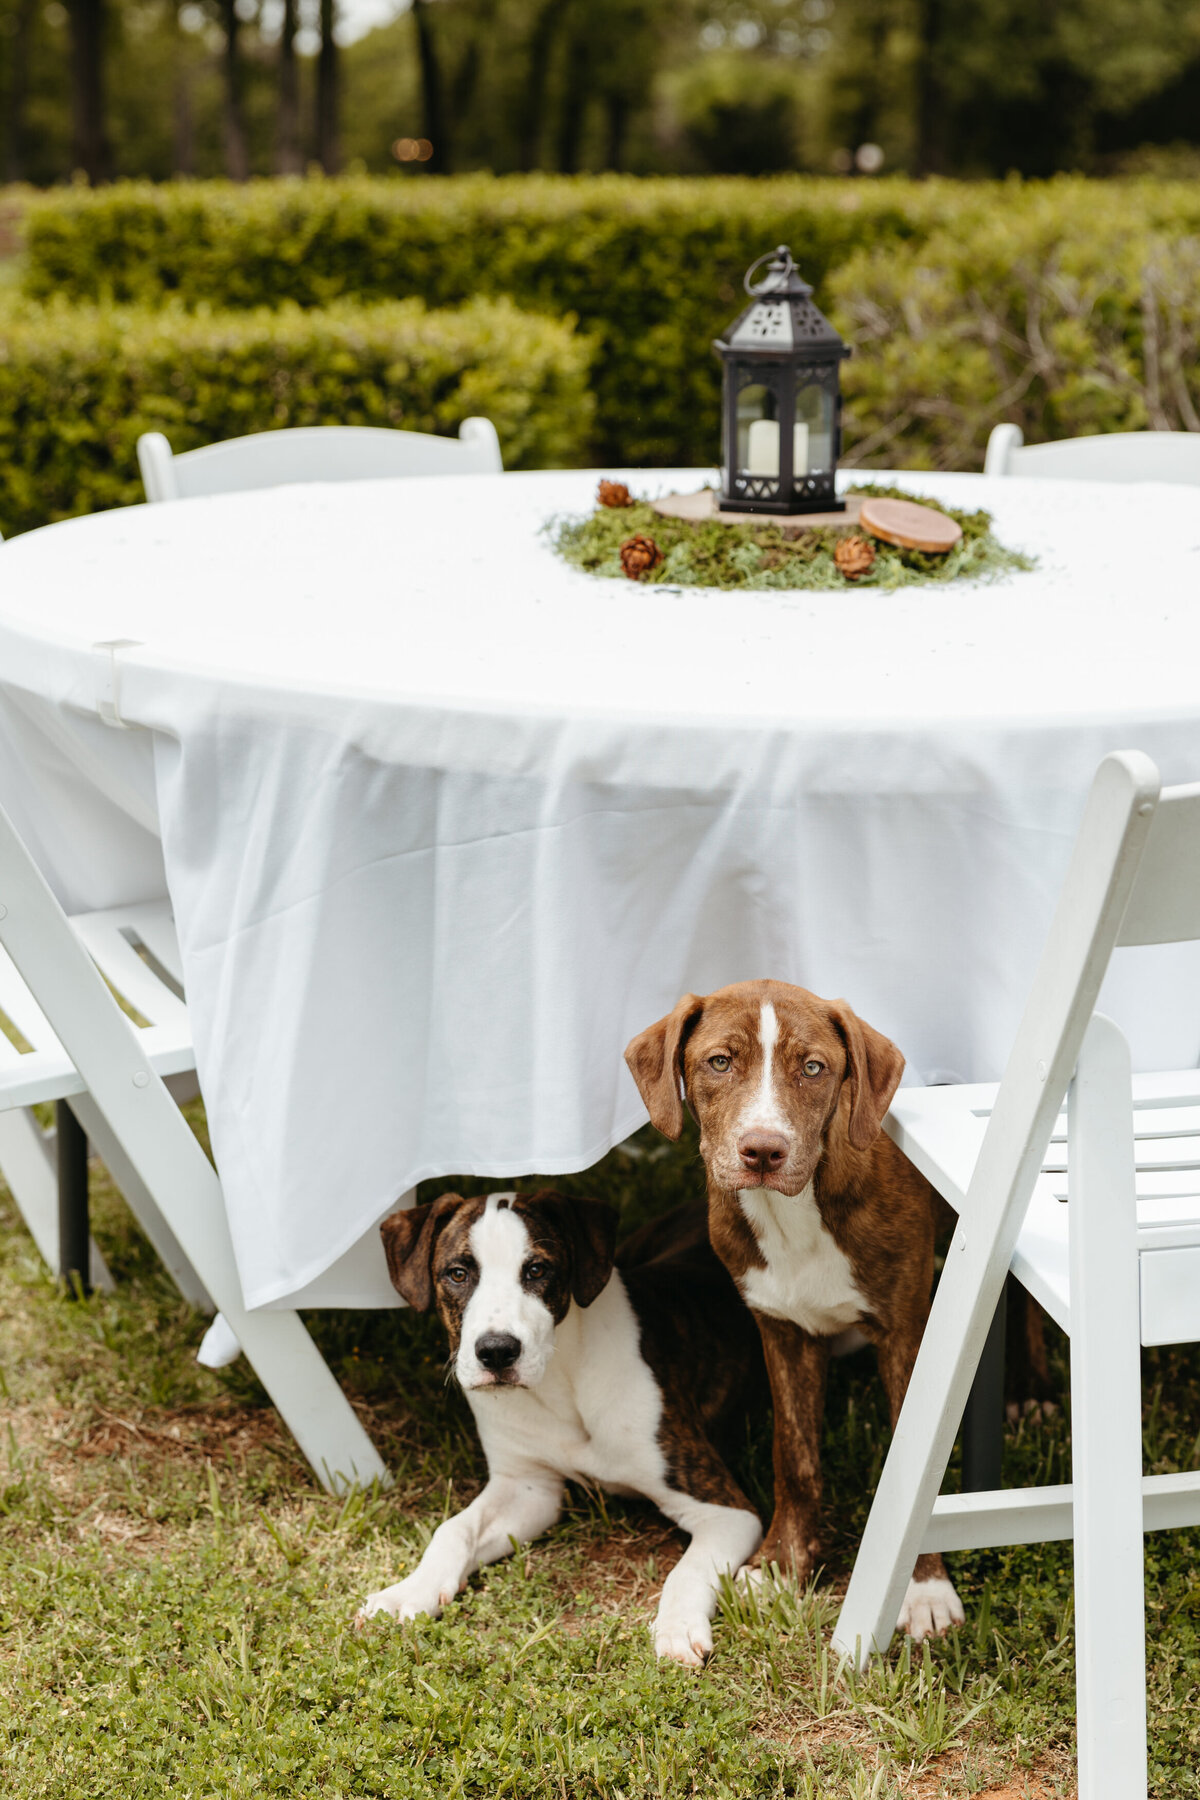 Two adorable dogs sitting under a white-covered table at a wedding reception